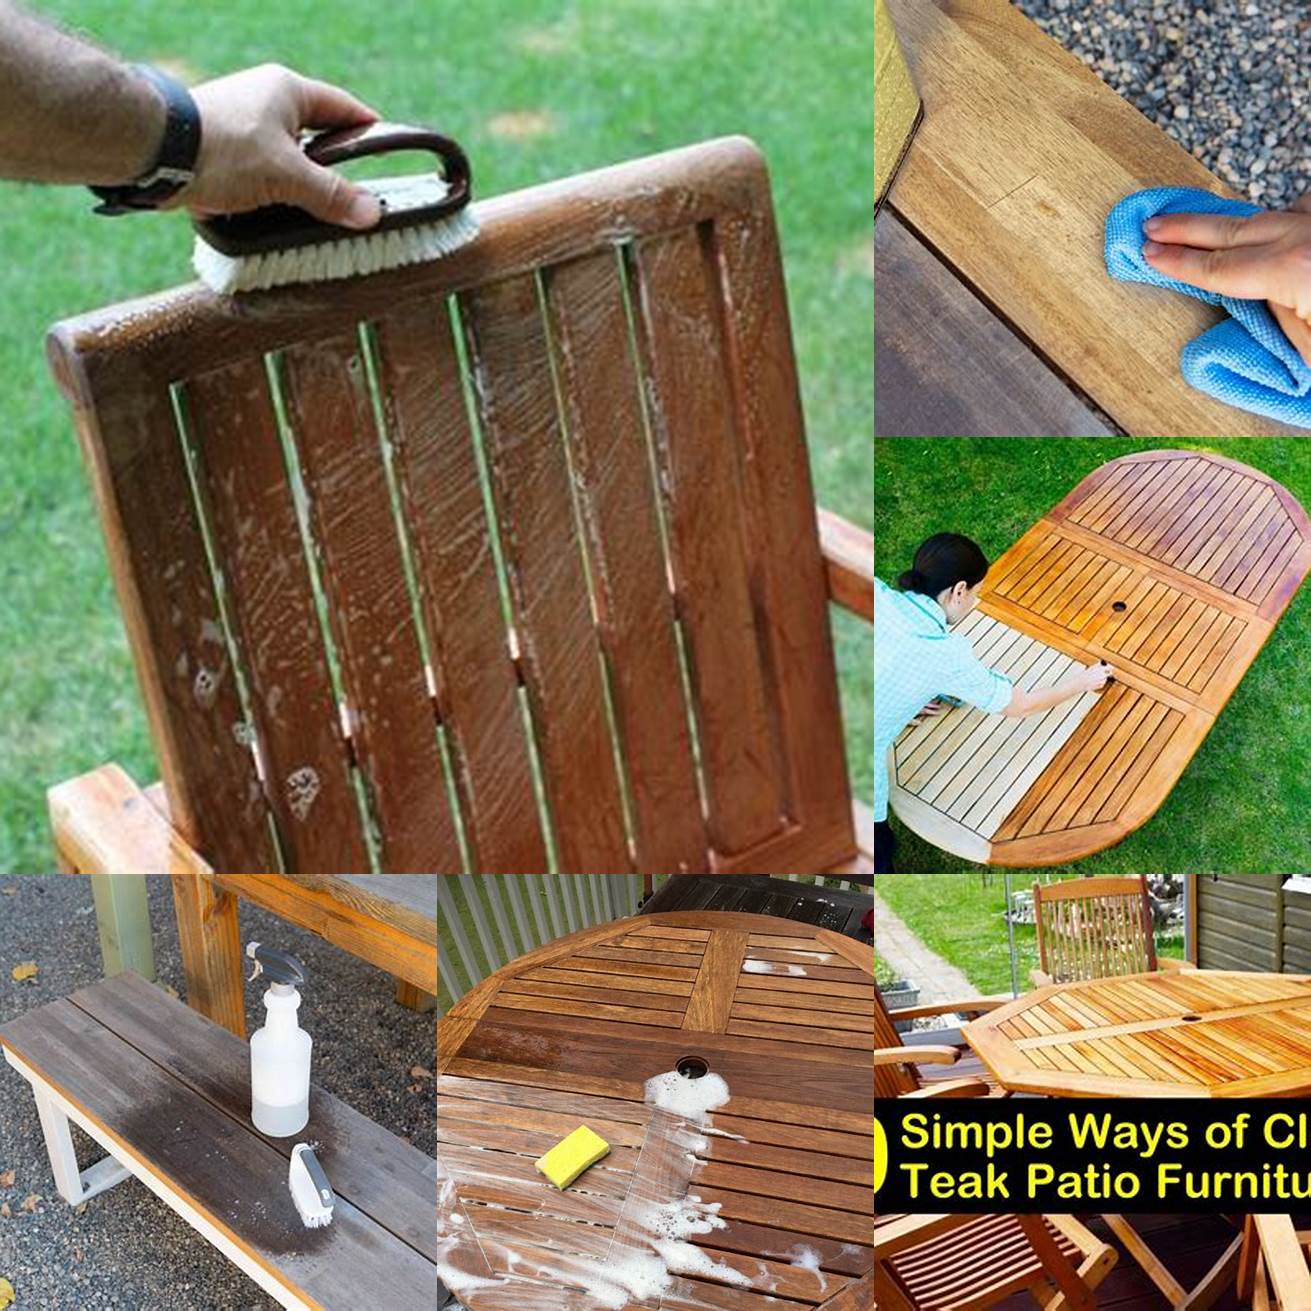 Always use a soft cloth to clean your teak furniture